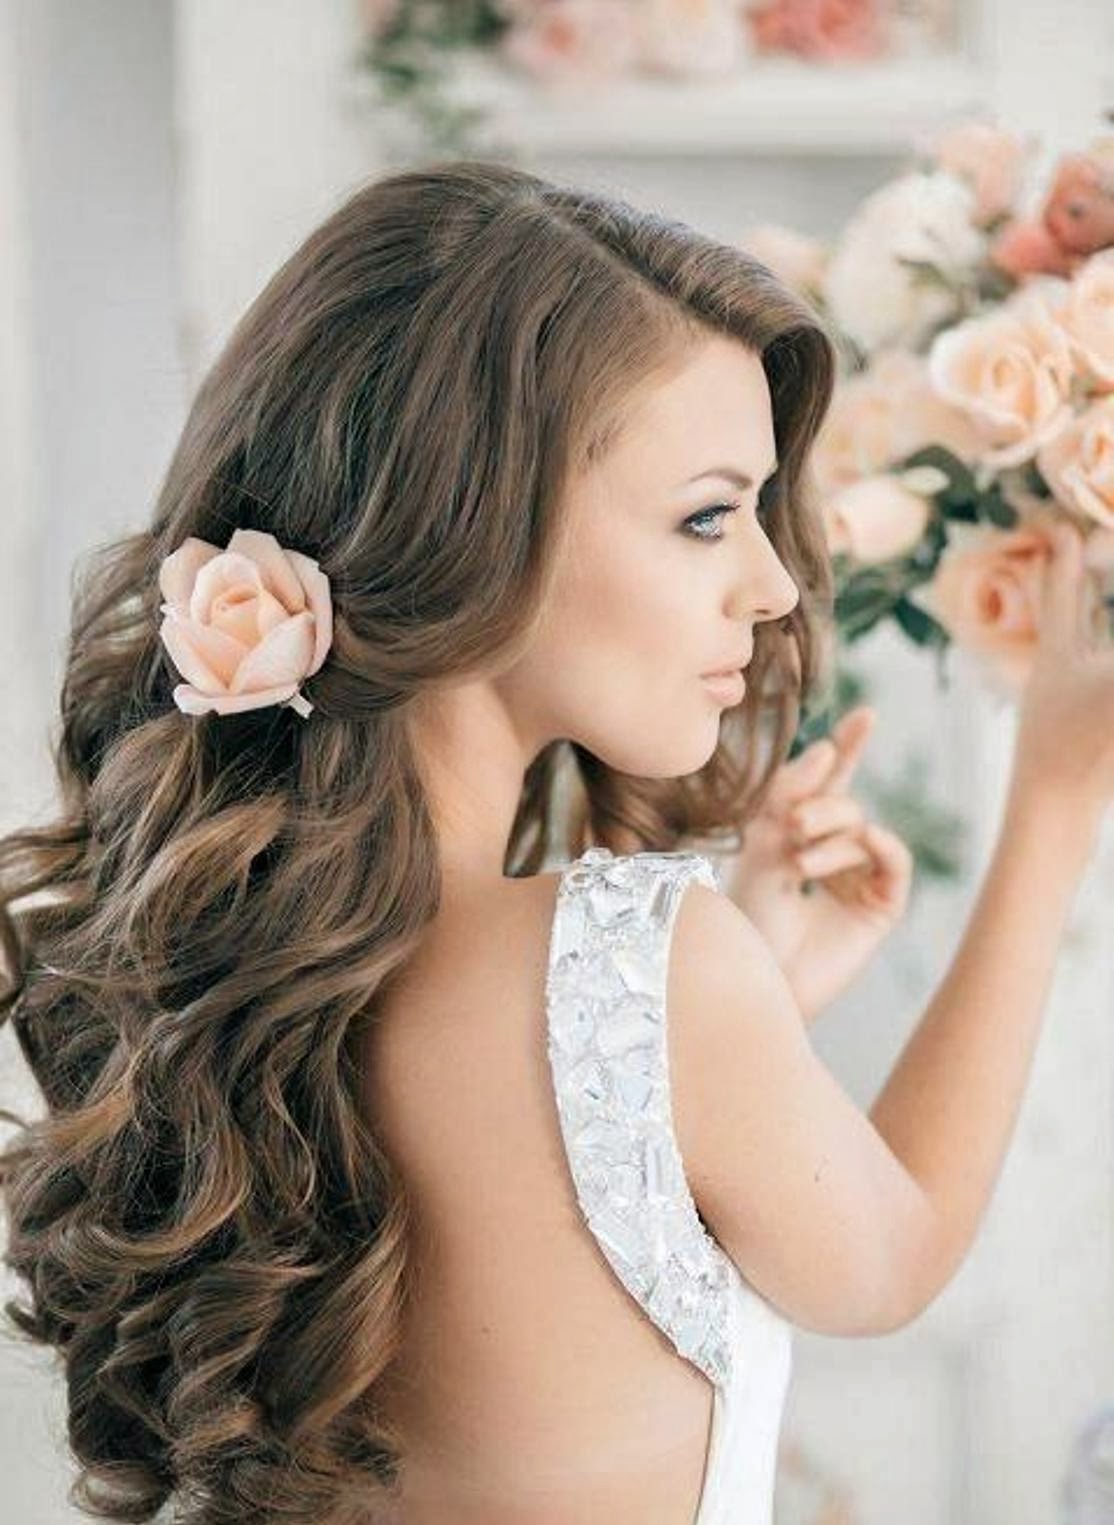 20 Long Curls Hairstyles for Weddings You Can Do At Home - MagMent